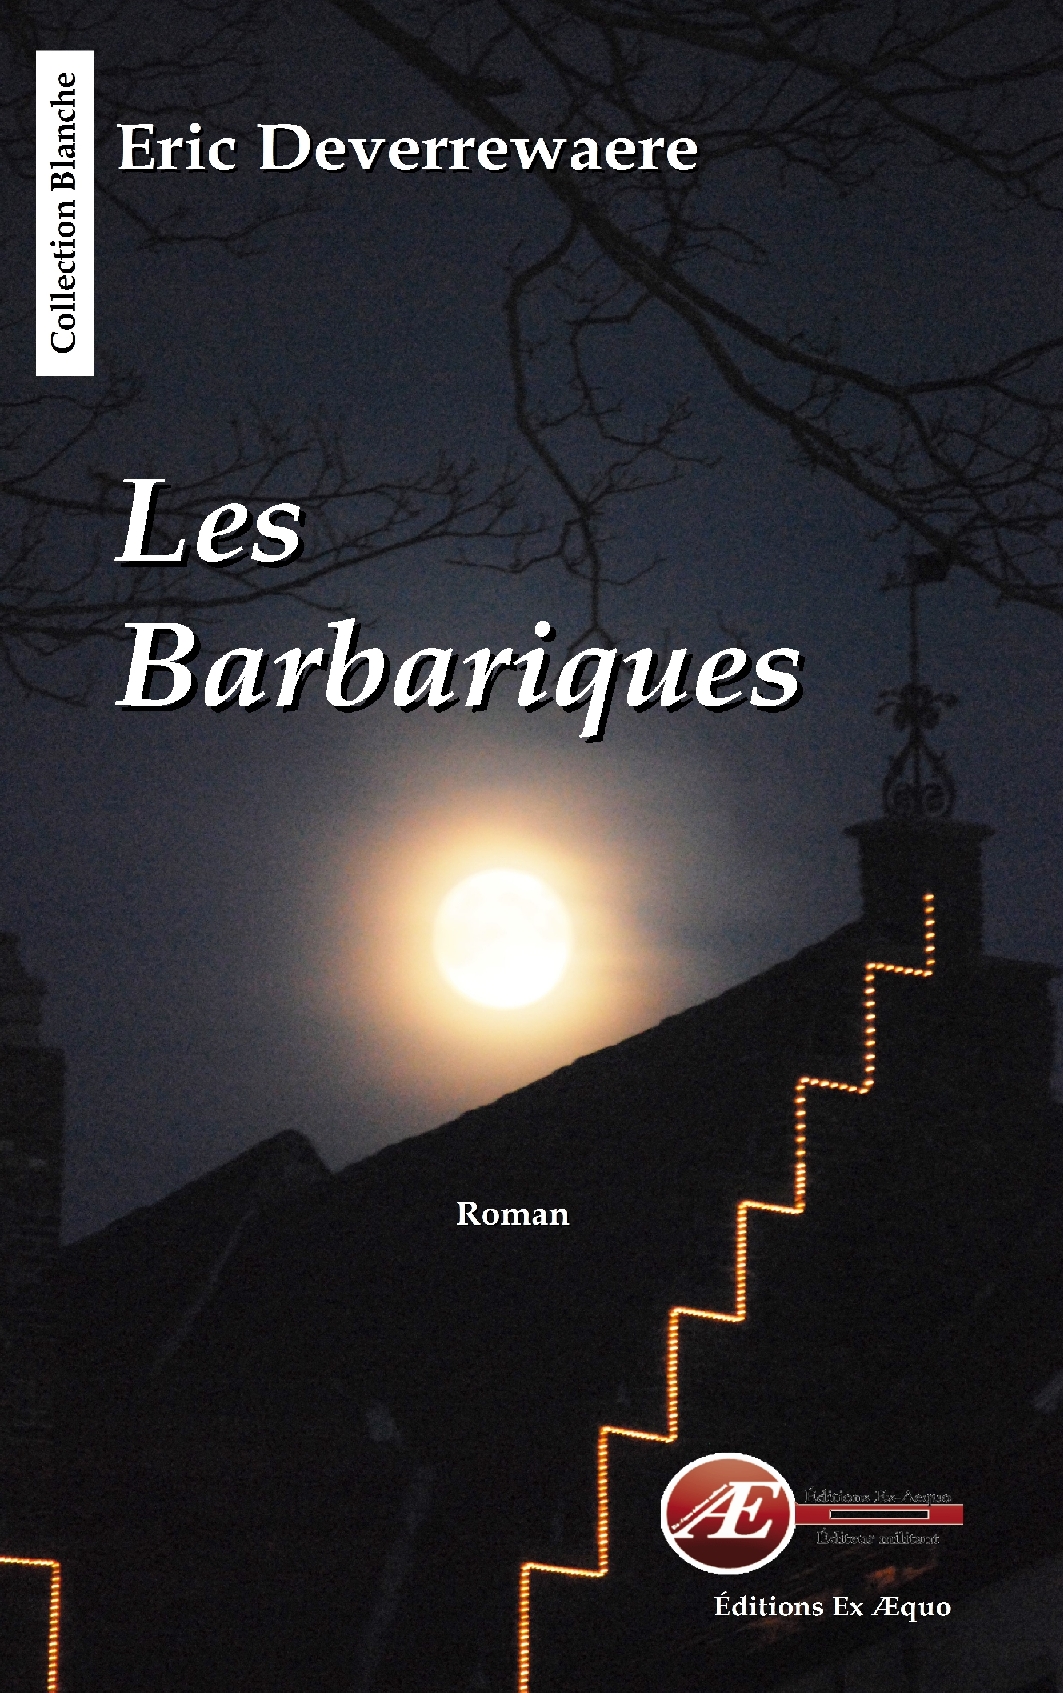 You are currently viewing Les barbariques, d’Eric Deverrewaere